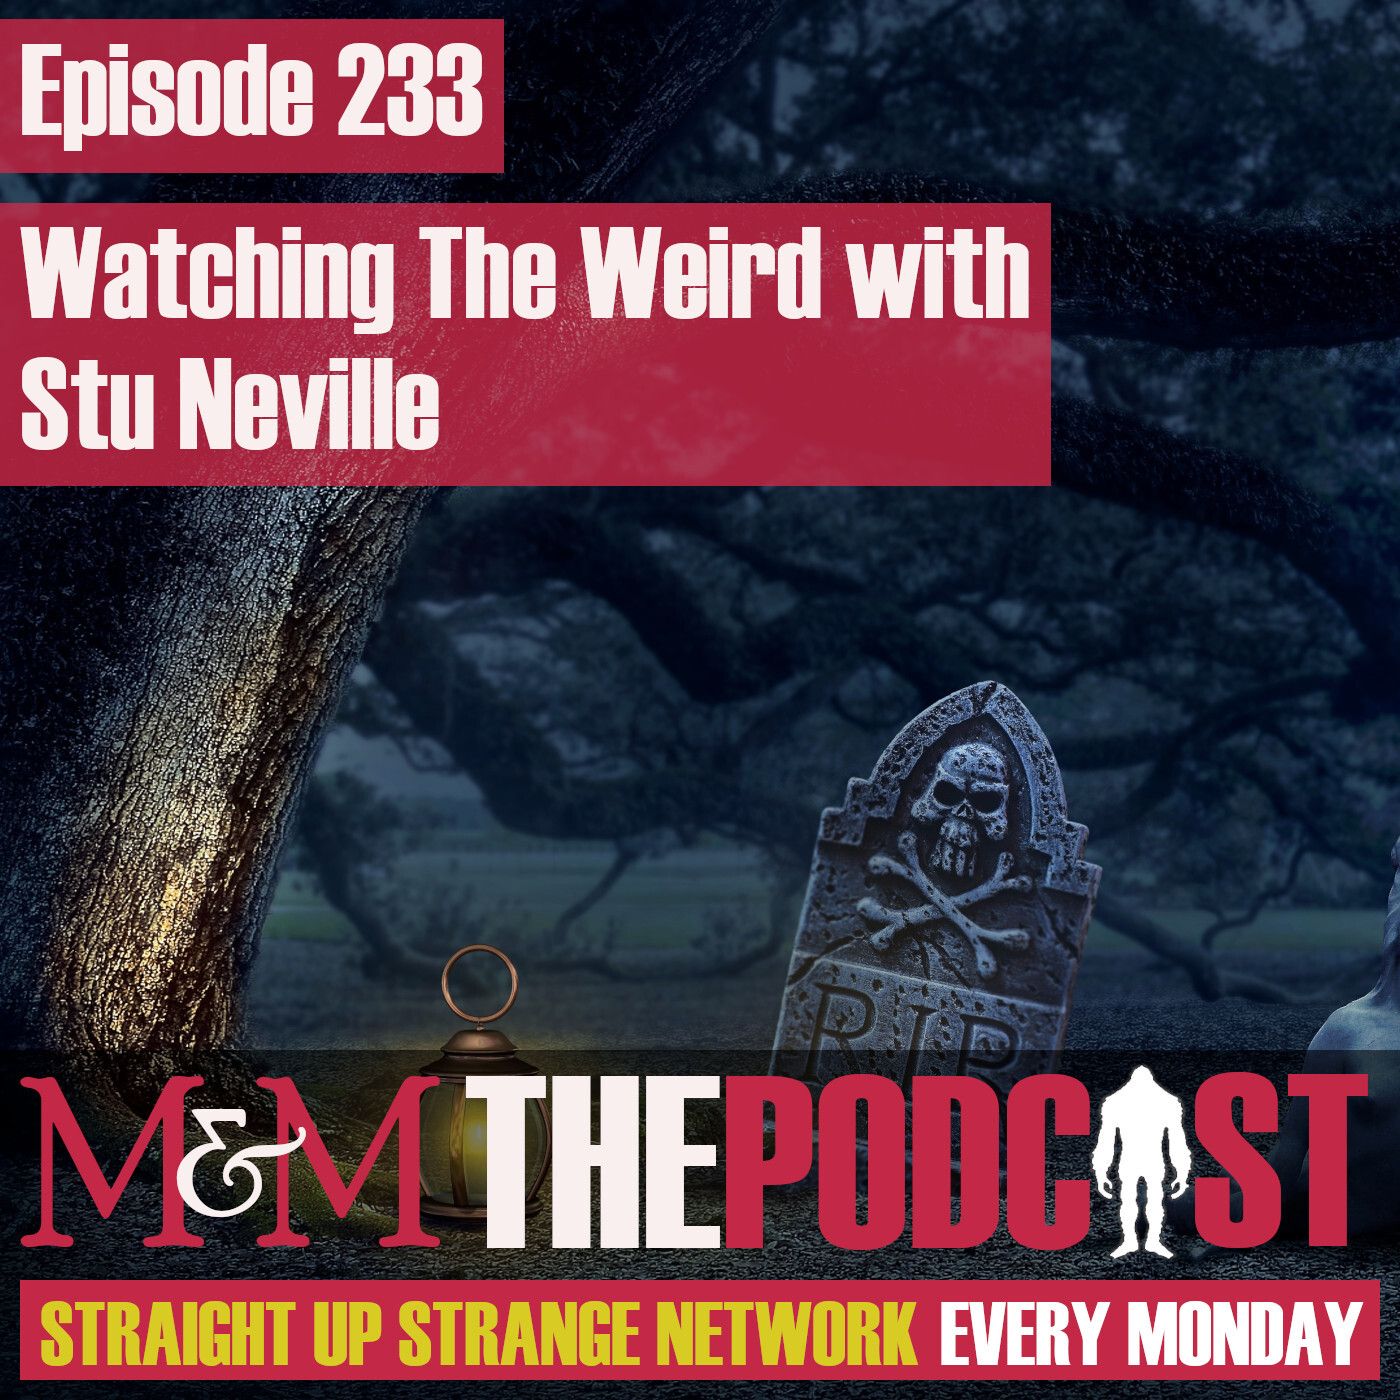 Mysteries and Monsters: Episode 233 Watching The Weird with Stu Neville